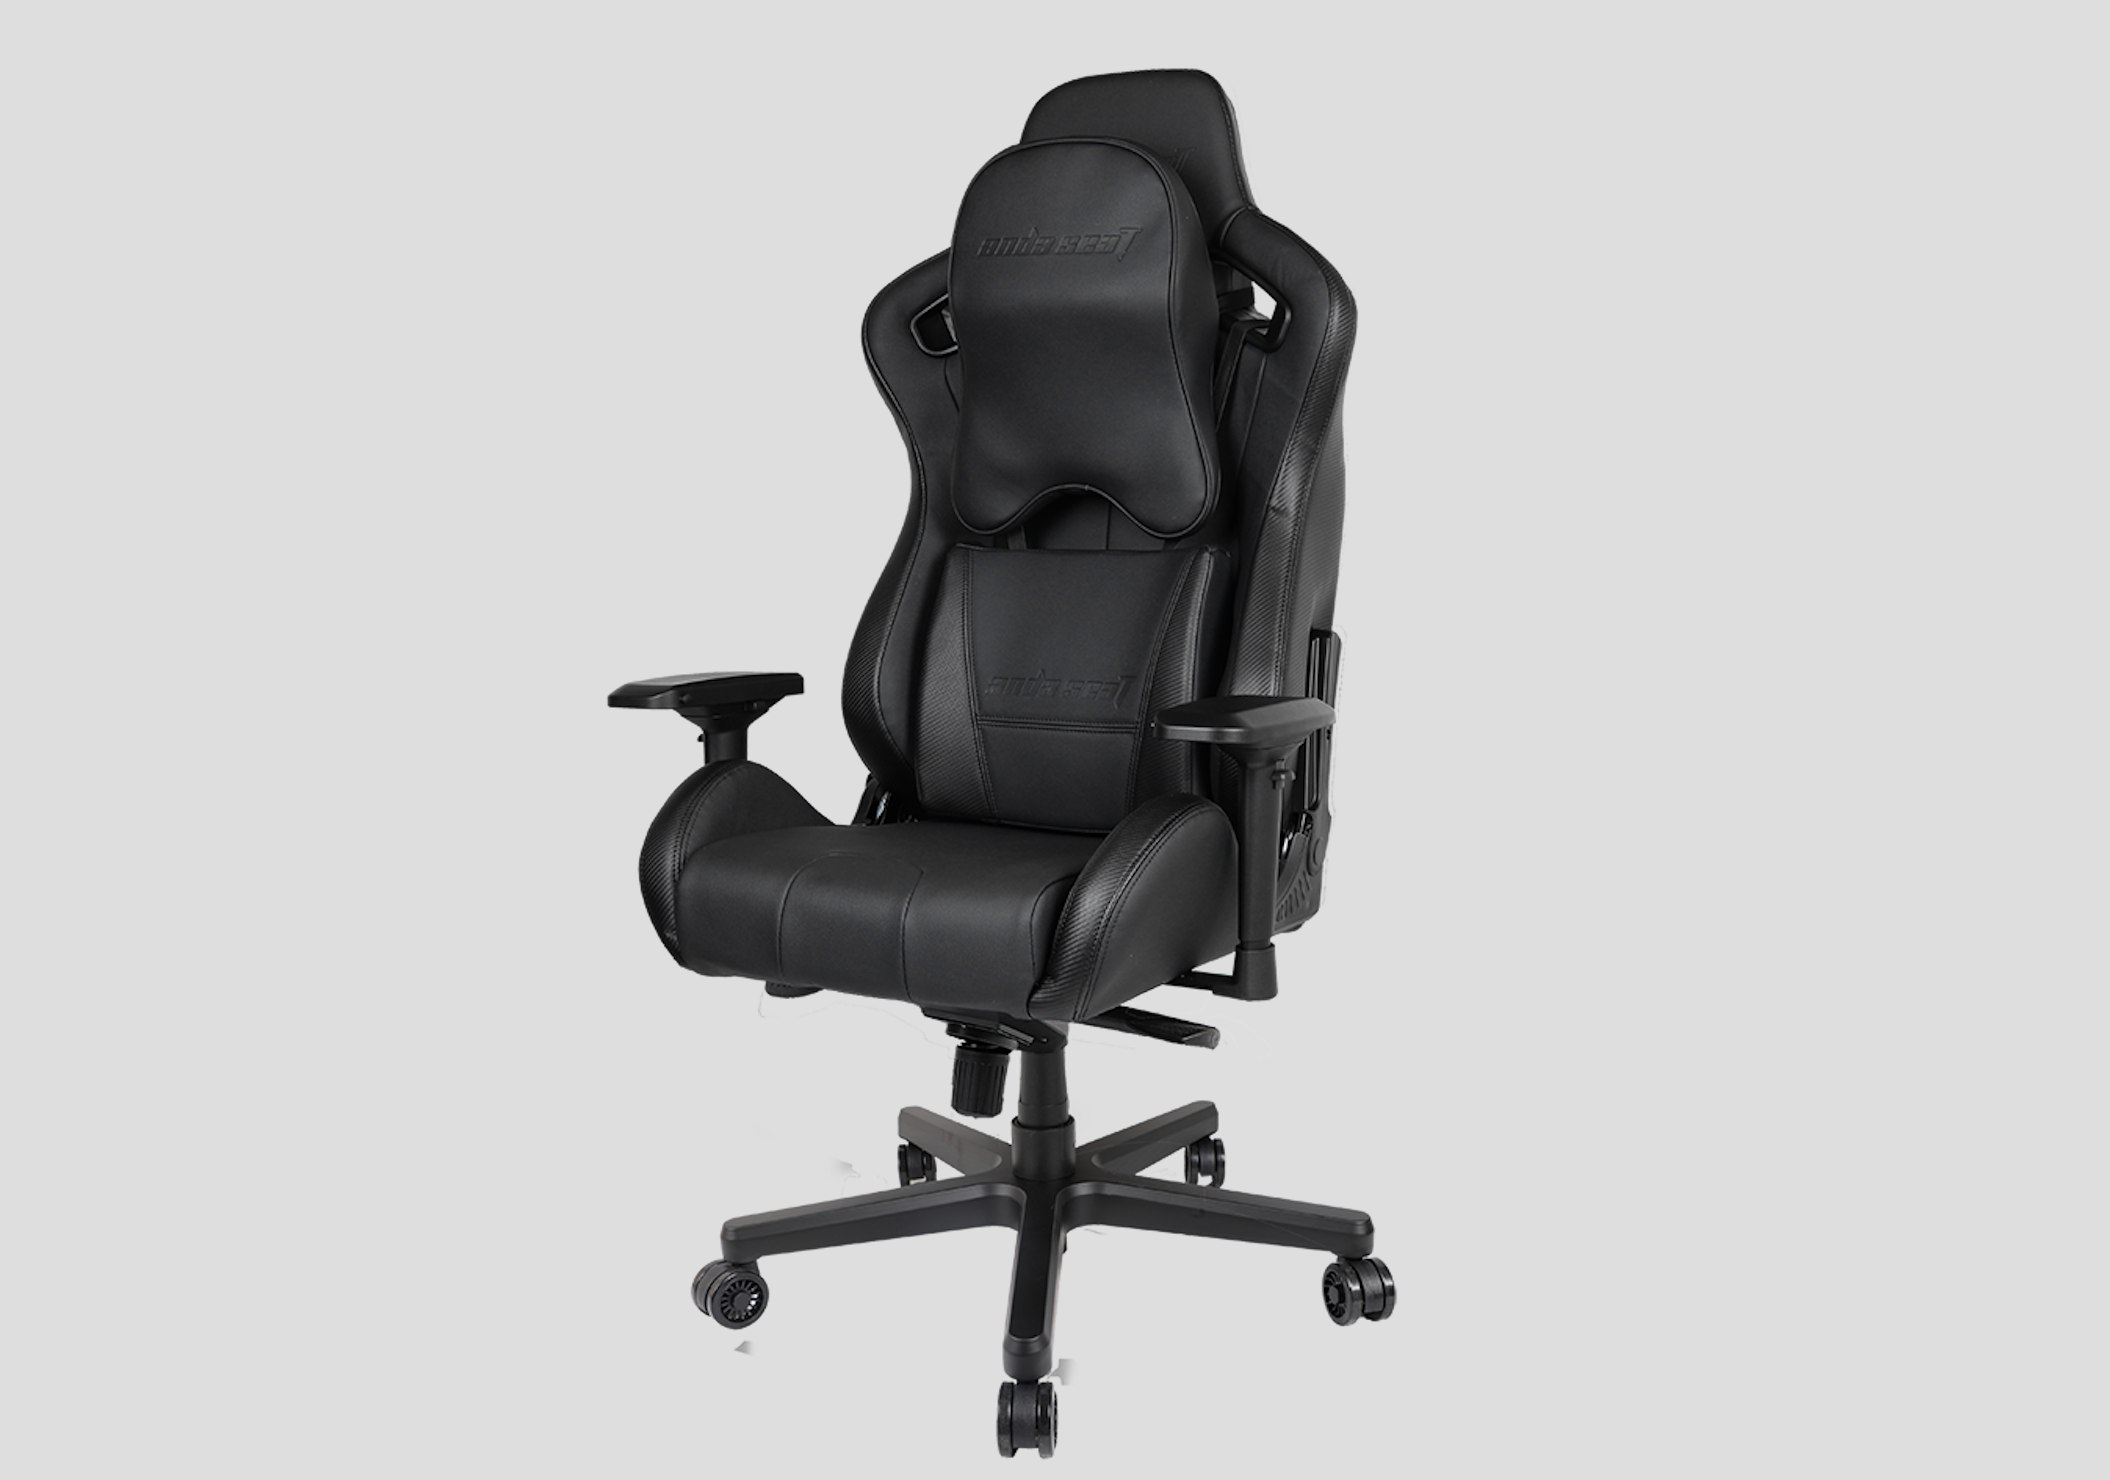 Anda Seat, Chair, Gaming Chair